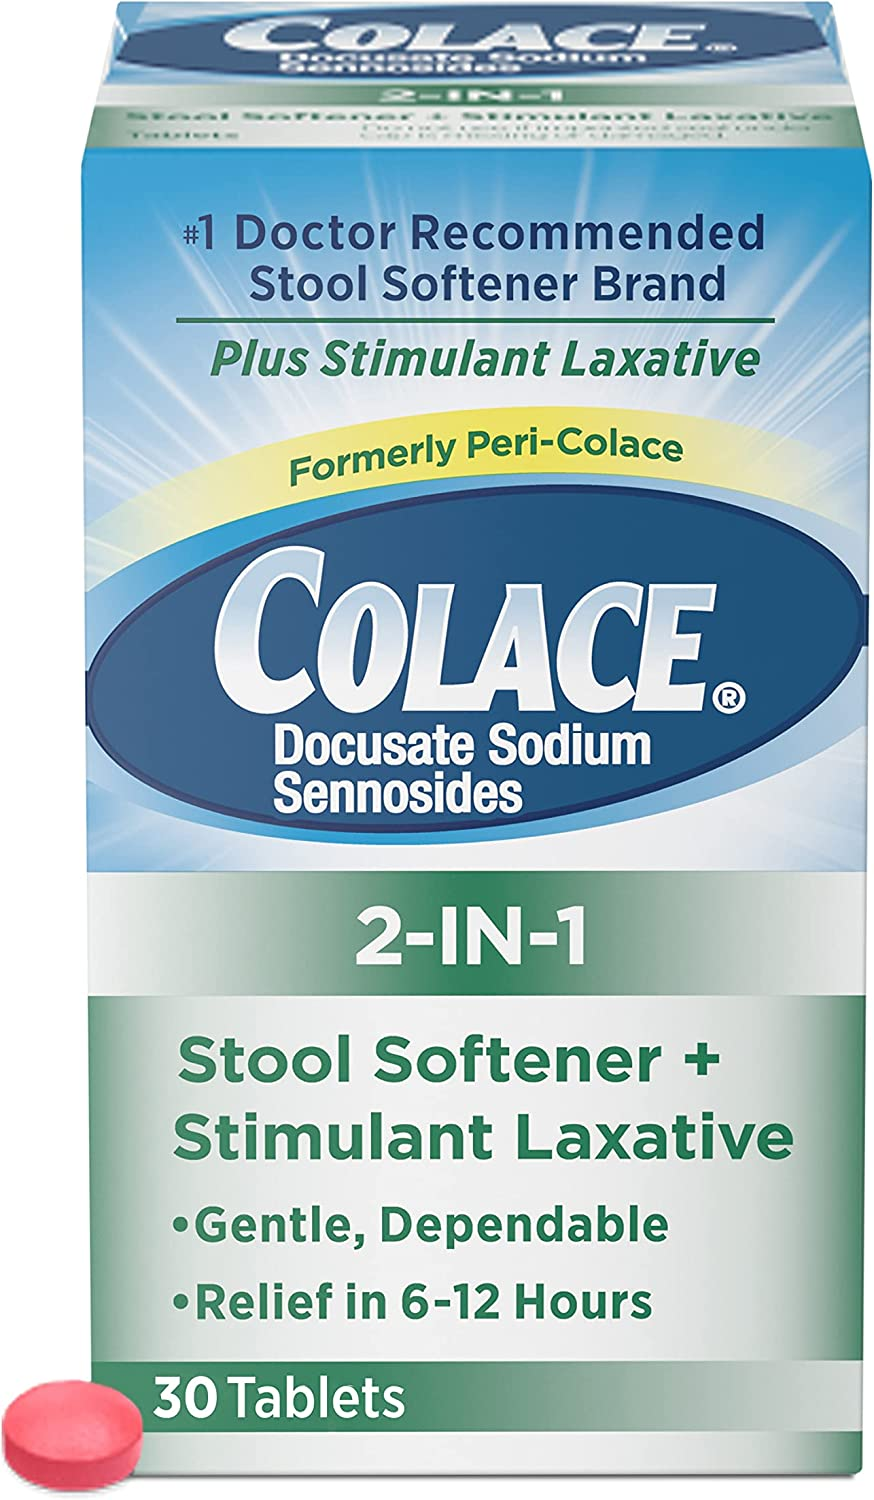 30-Ct Colace 2-In-1 Stool Softener & Stimulant Laxative Tablets $8.15